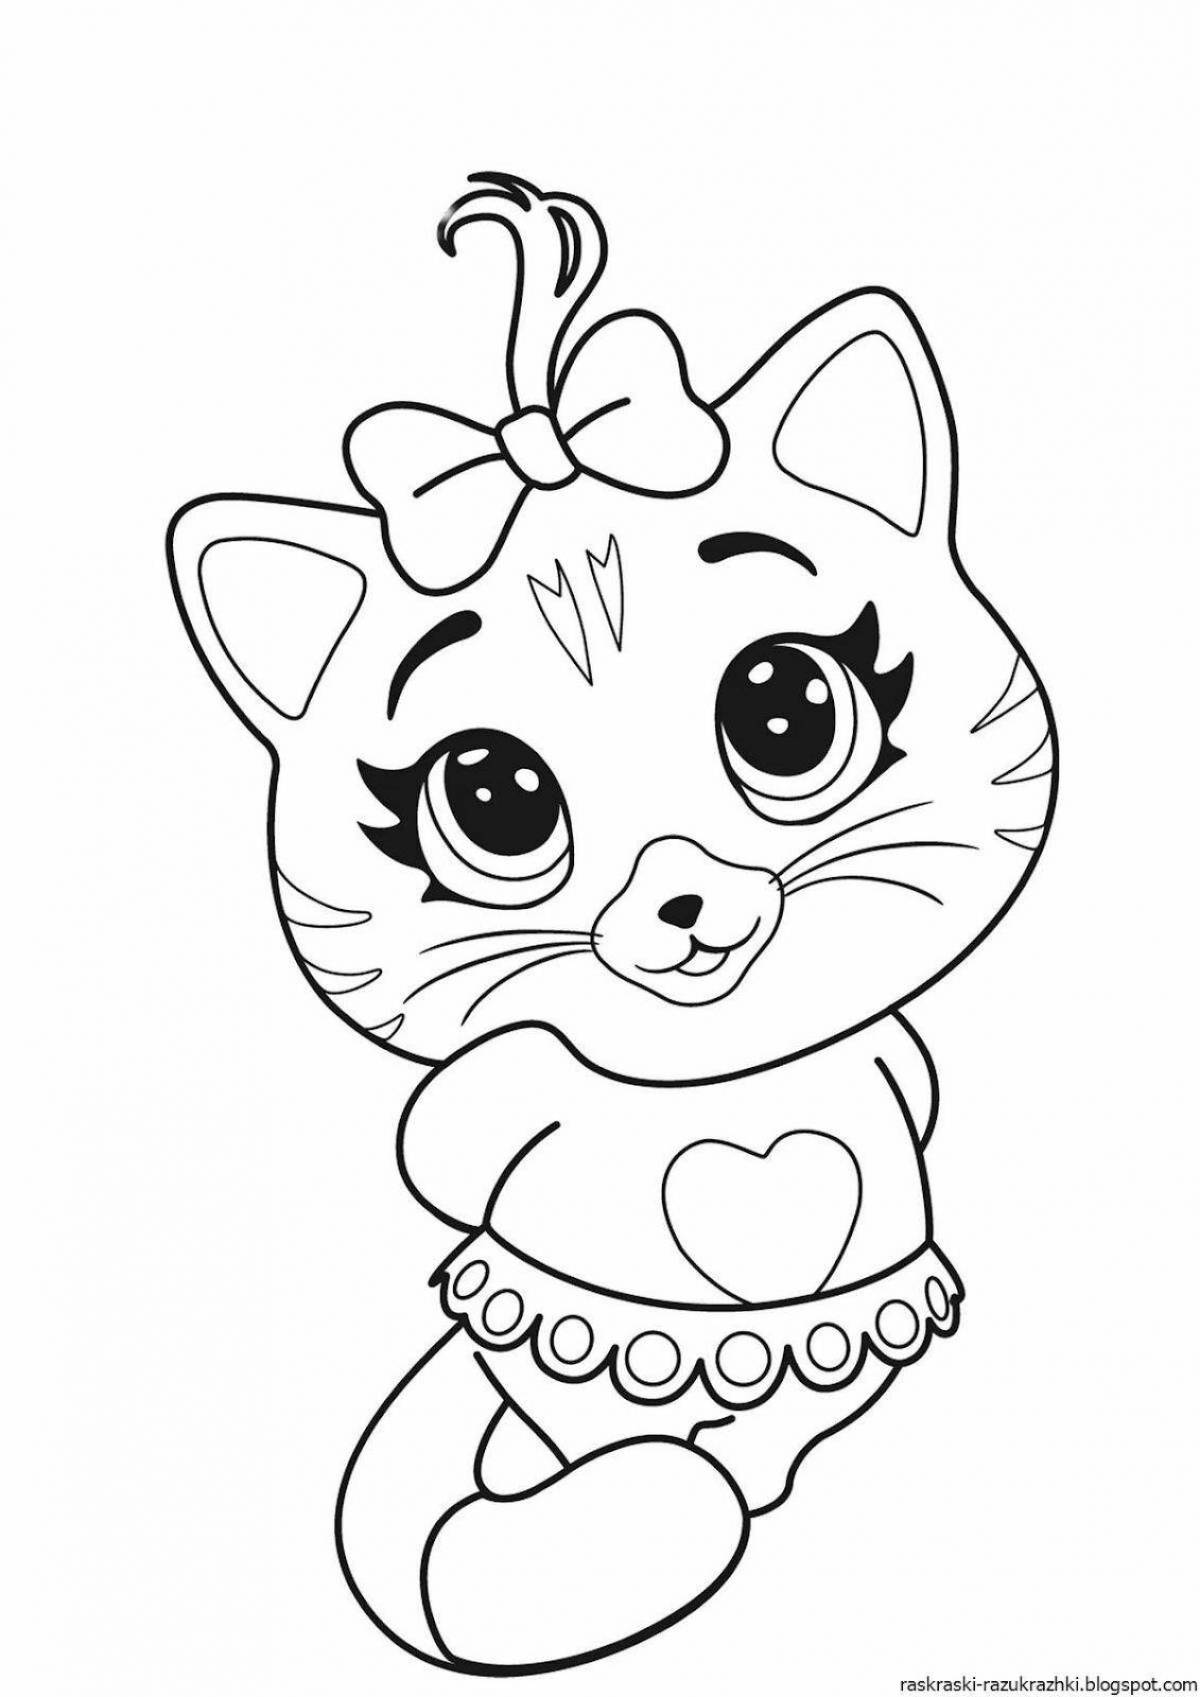 Playful coloring kitty for children 4-5 years old